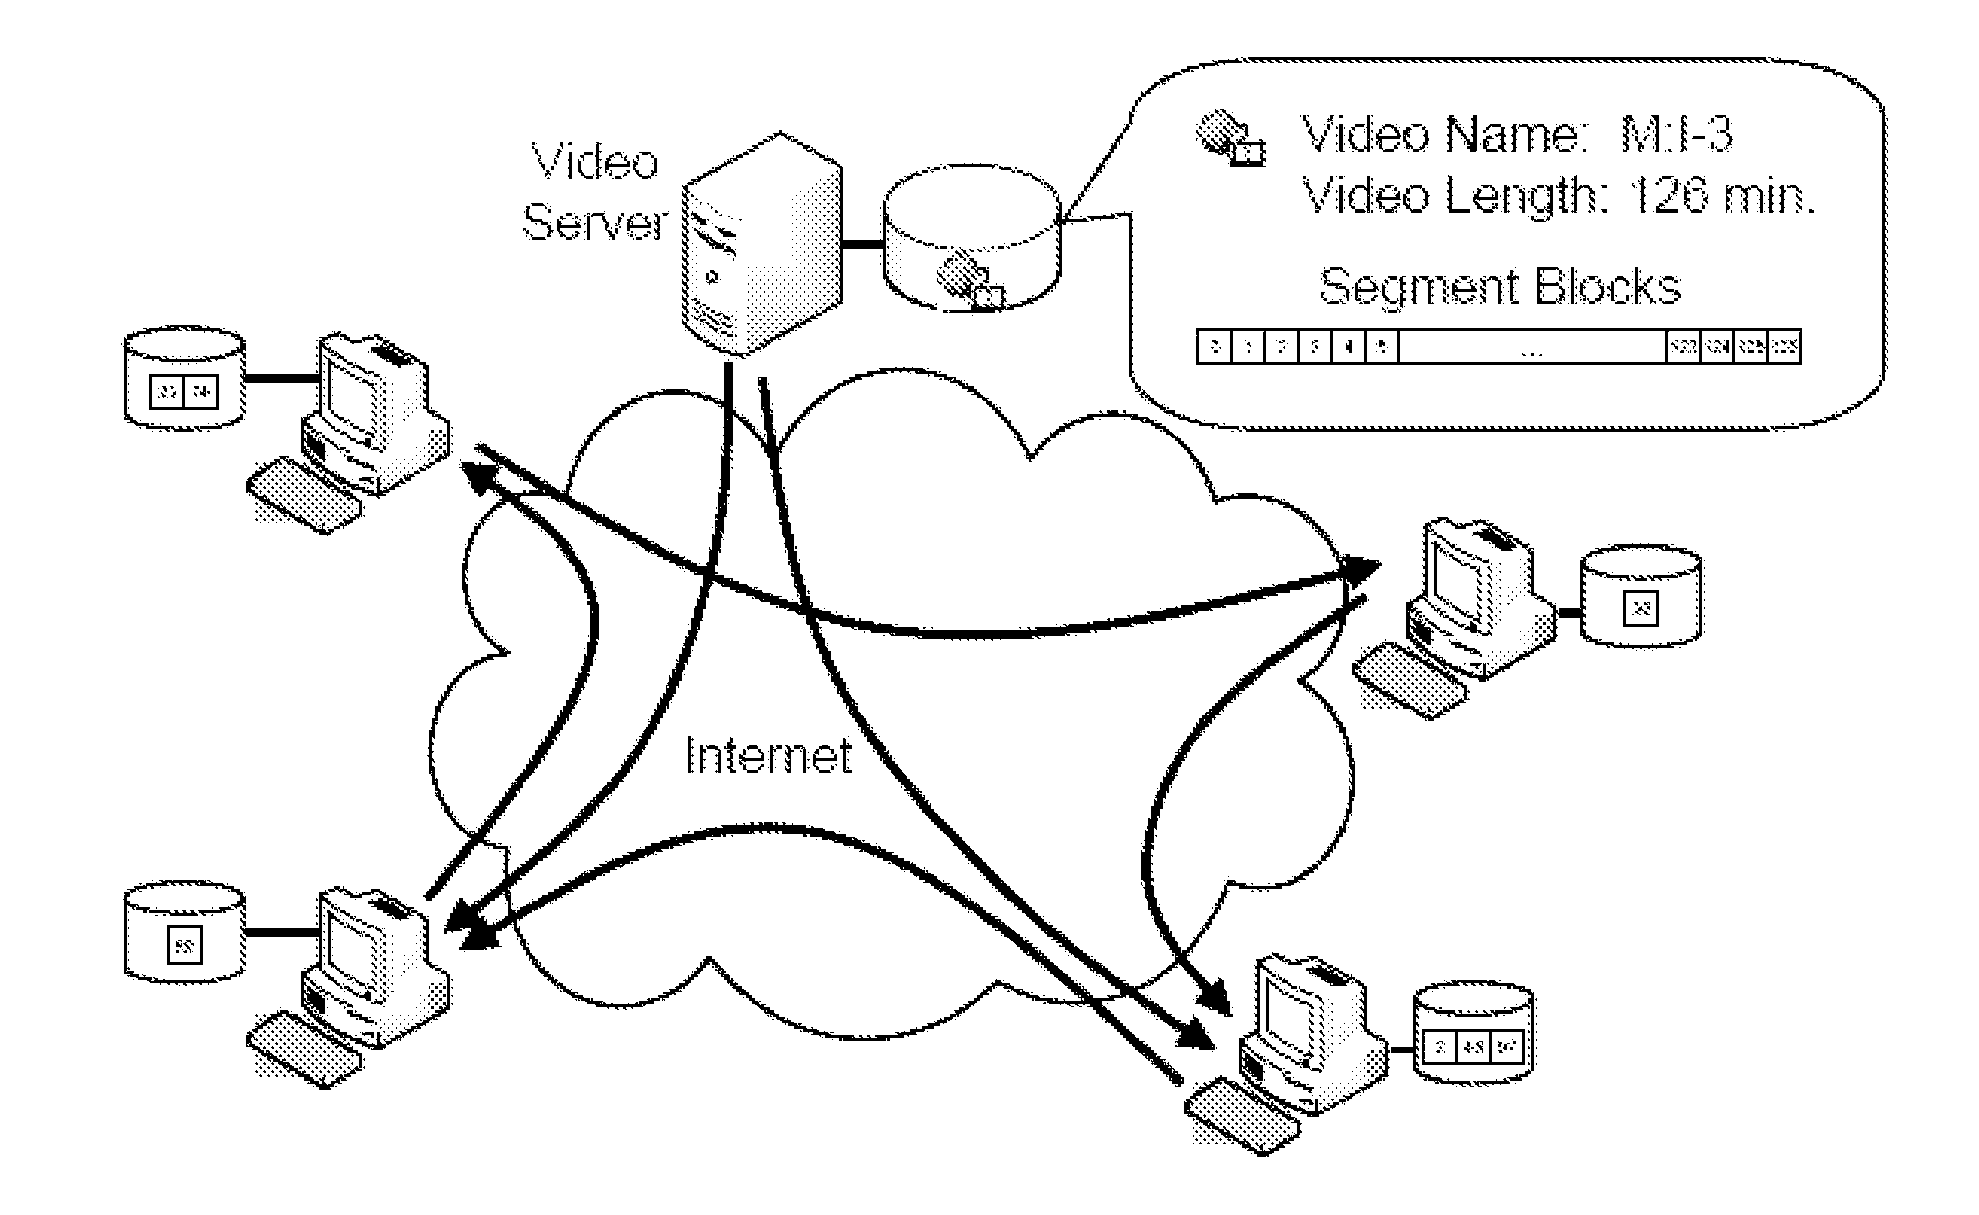 Distributed storage to support user interactivity in peer-to-peer video streaming